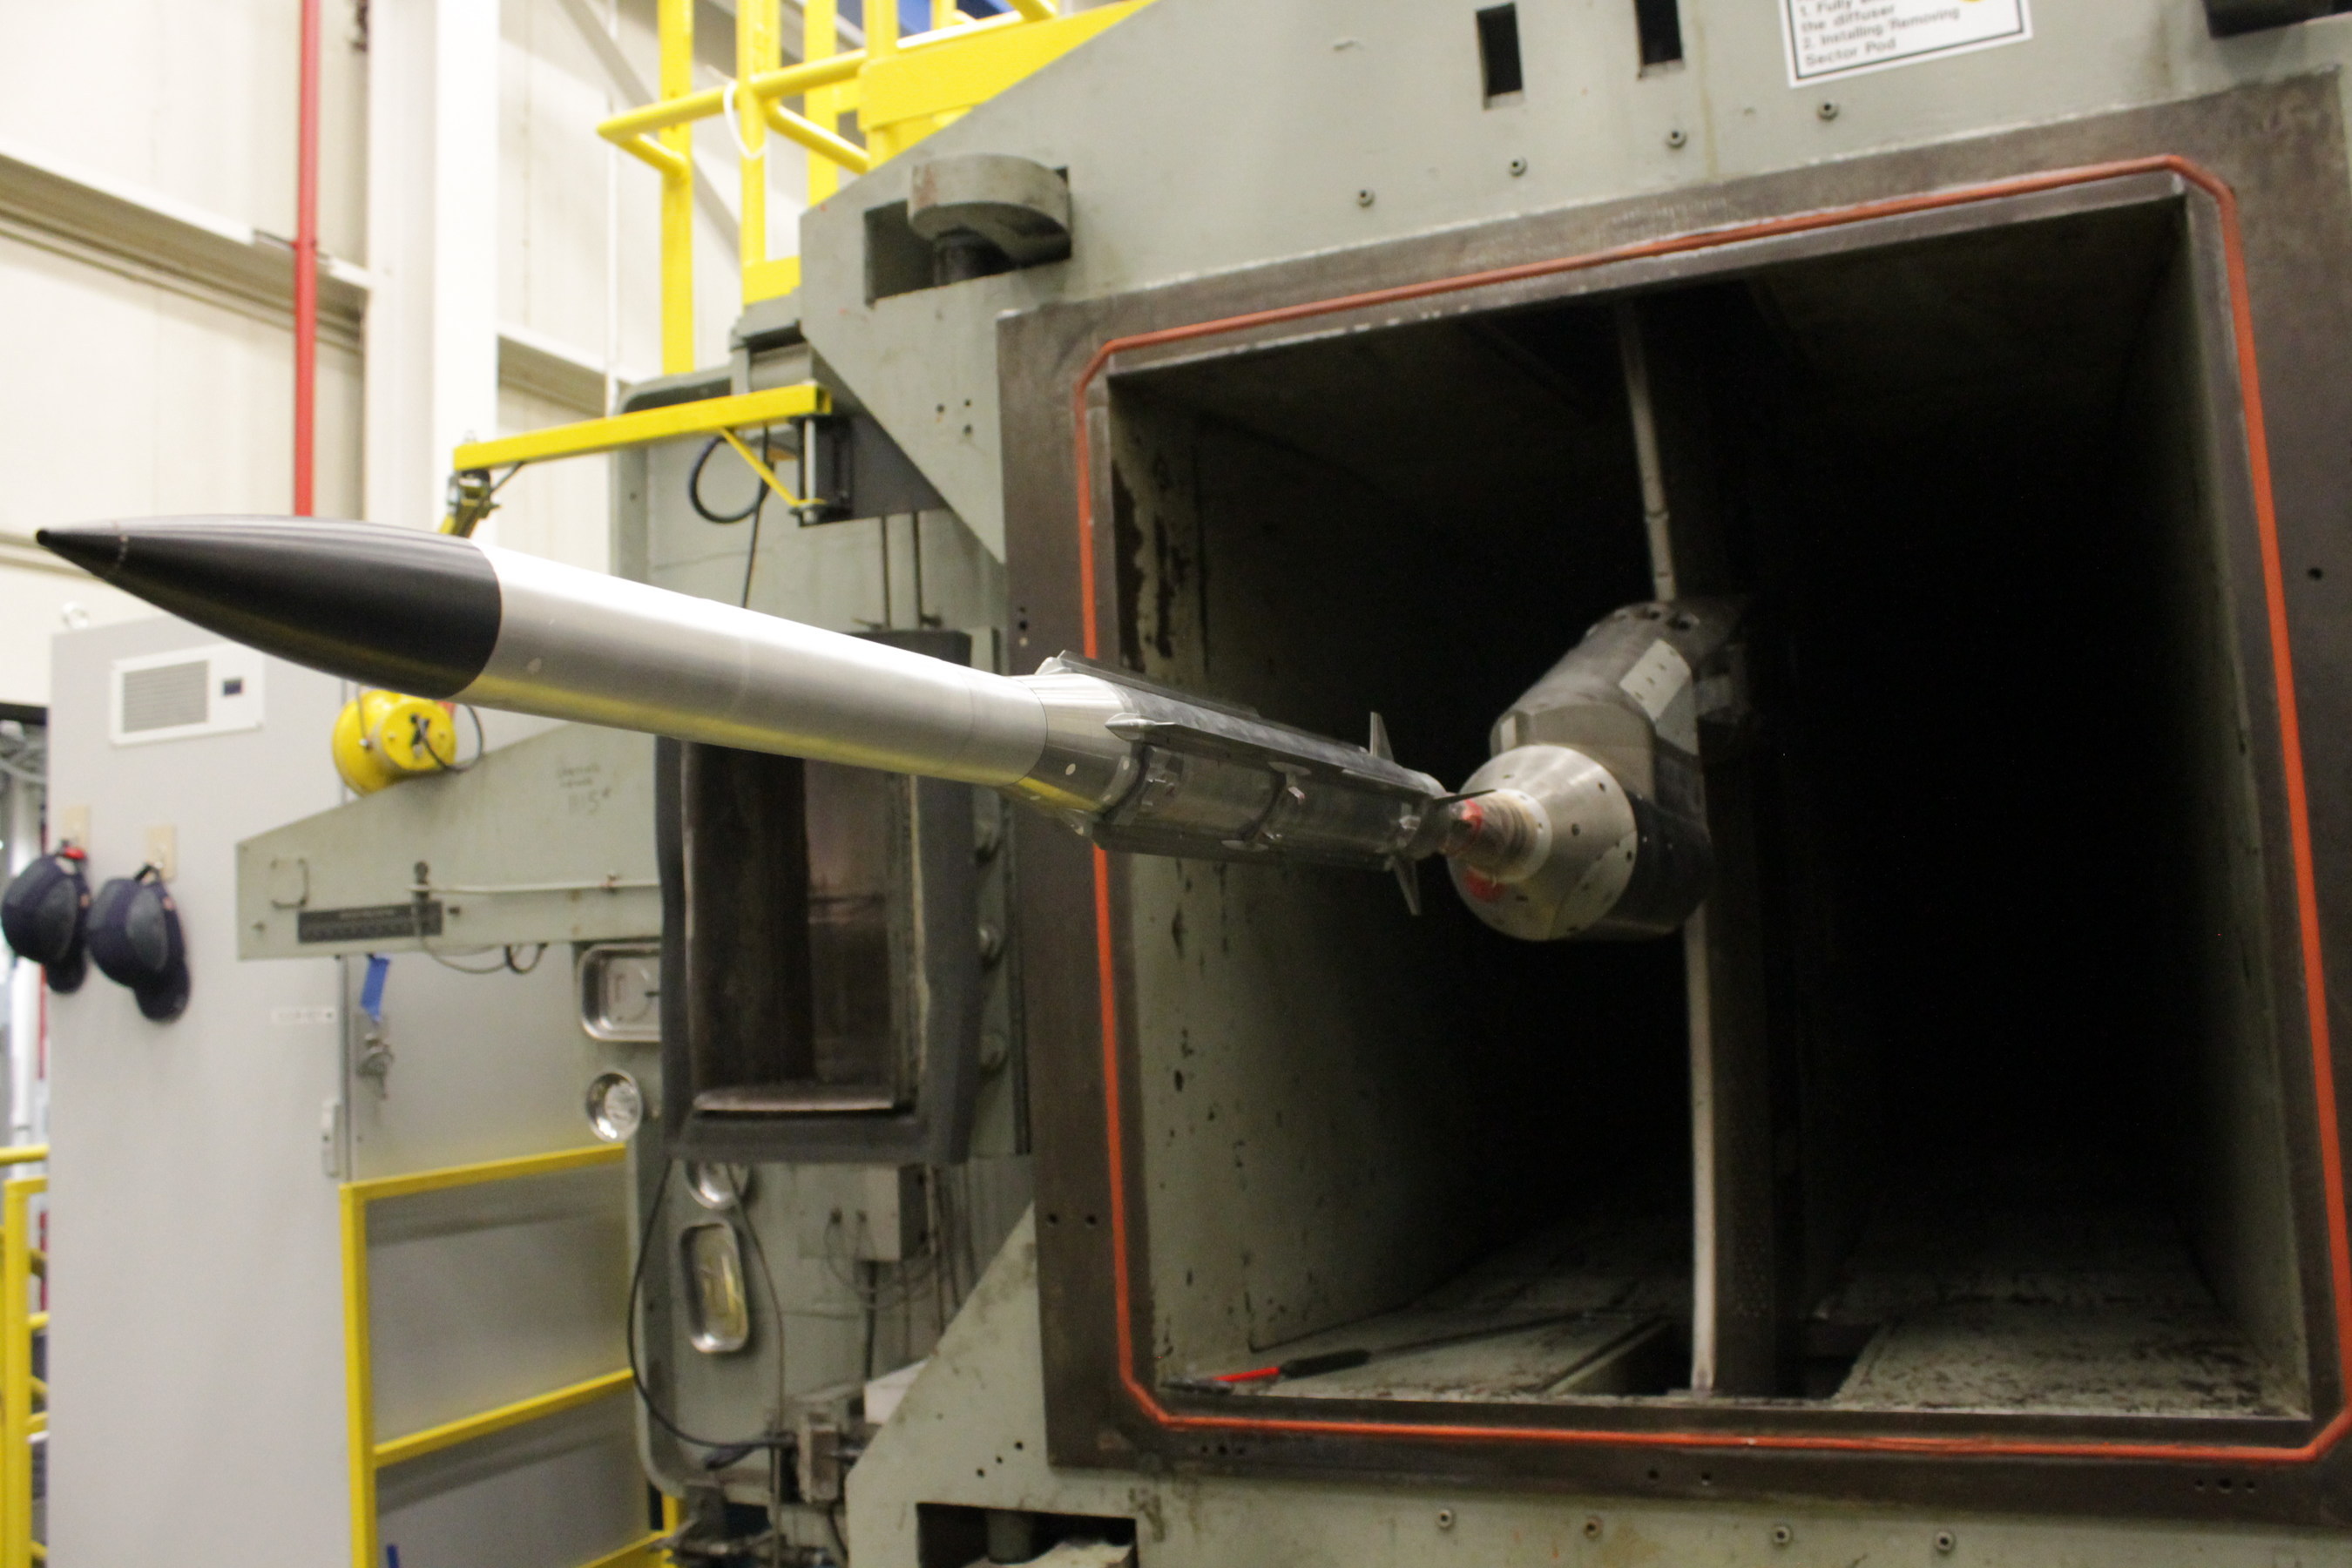 Raytheon engineers recently completed wind tunnel testing on a new, extended-range variant of the AMRAAM air-to-air missile. Testing is a key step in qualifying the missile for the NASAMS launch system.